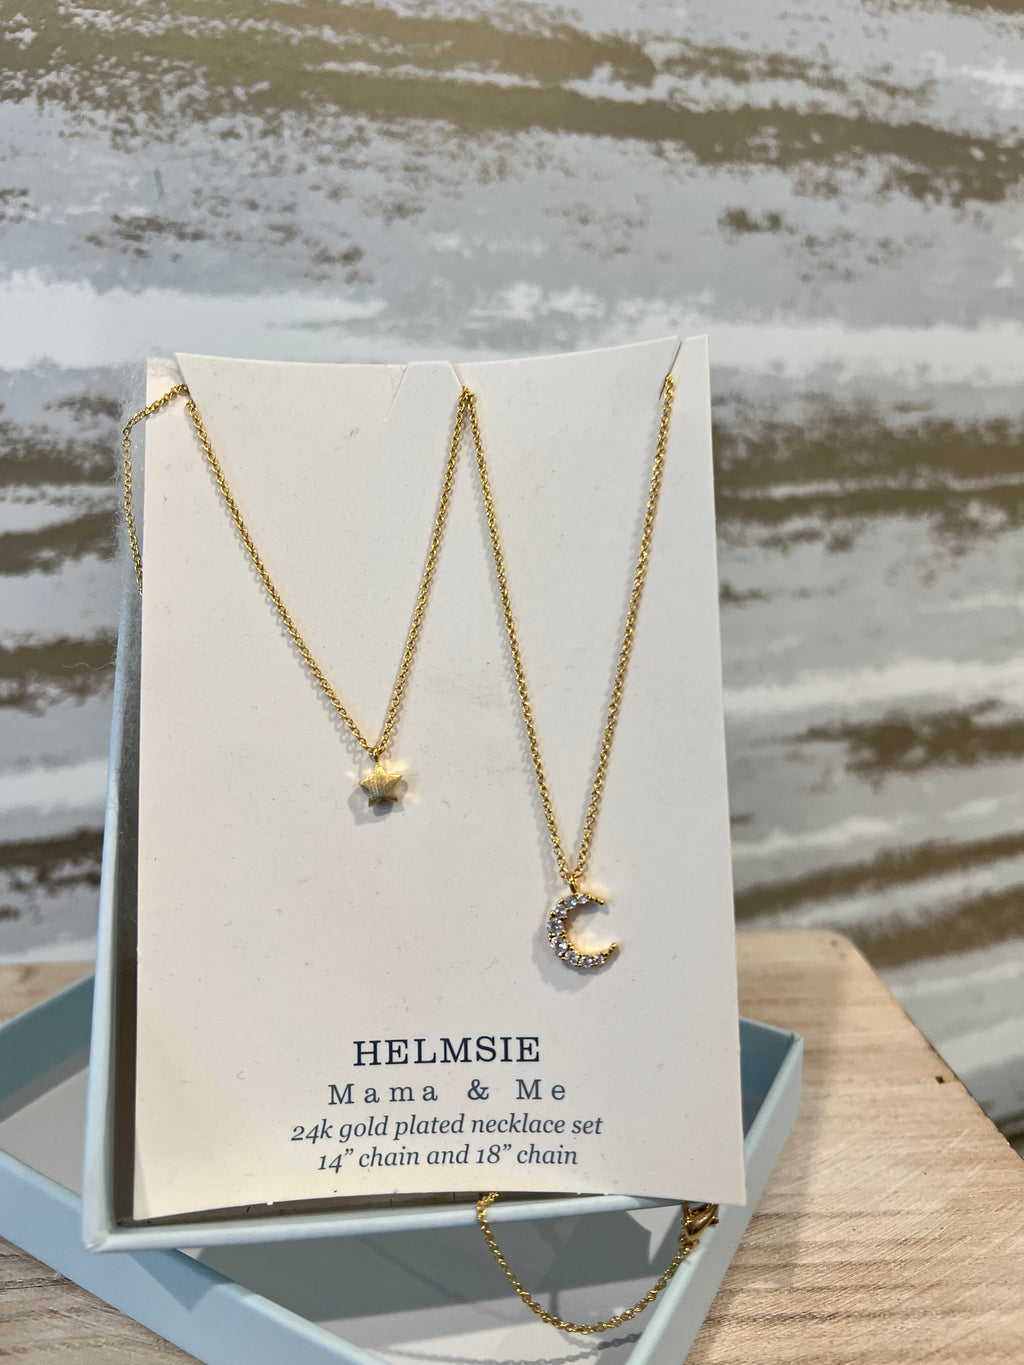 MAMA & ME 24K GOLD PLATED MATCHING NECKLACES